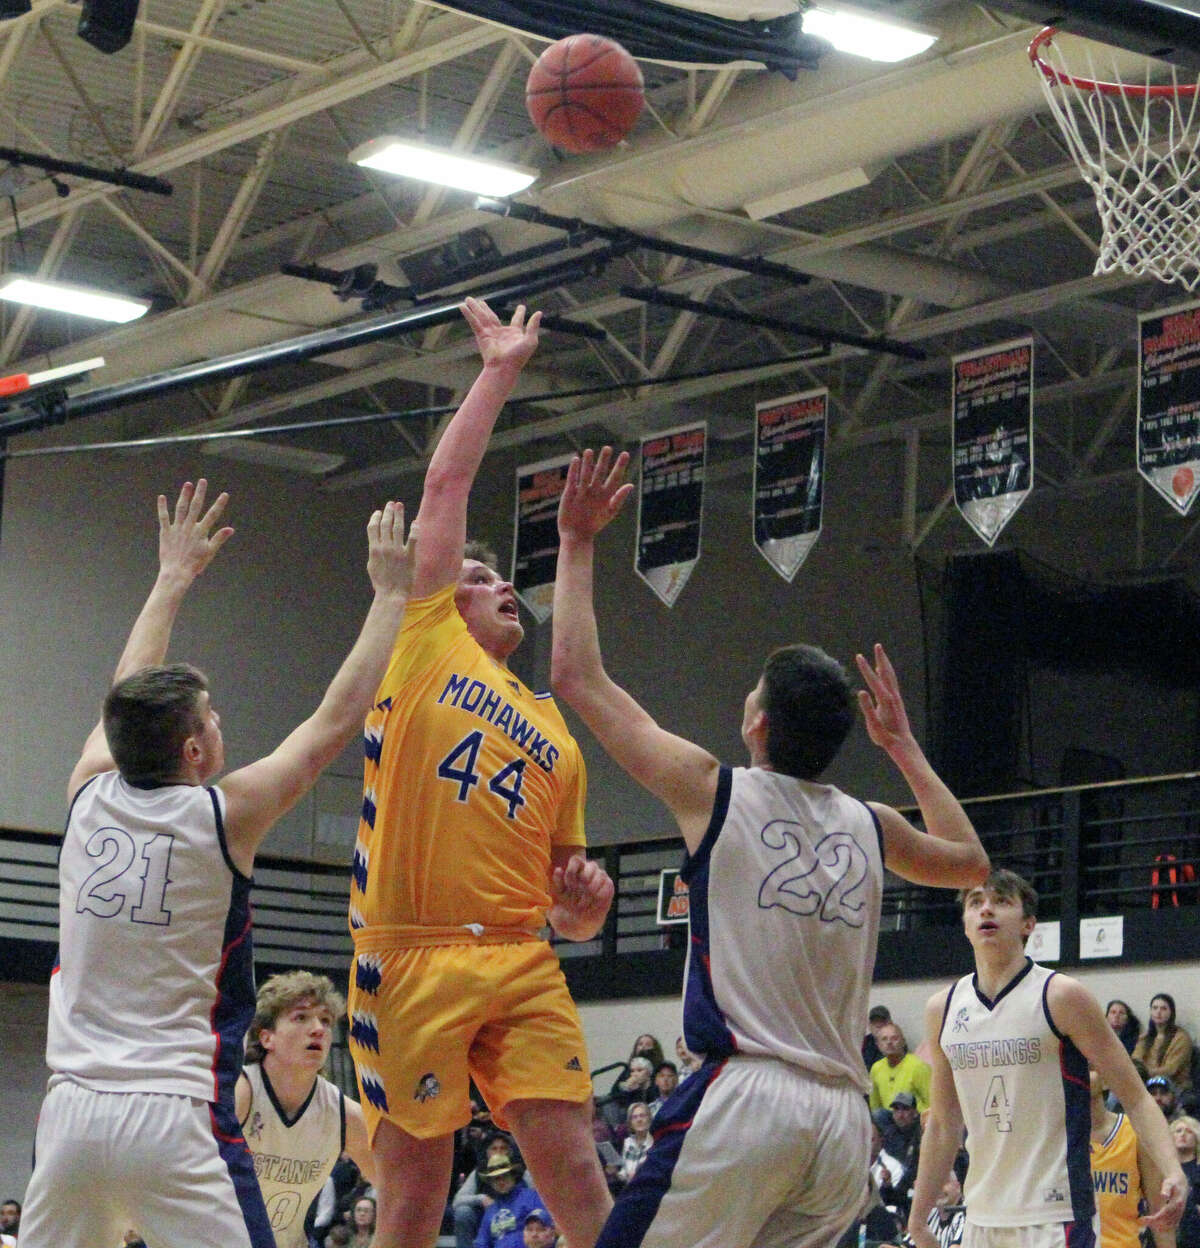 The Morley Stanwood boys' basketball team was defeated by Montabella in the district semifinal game Wednesday night.